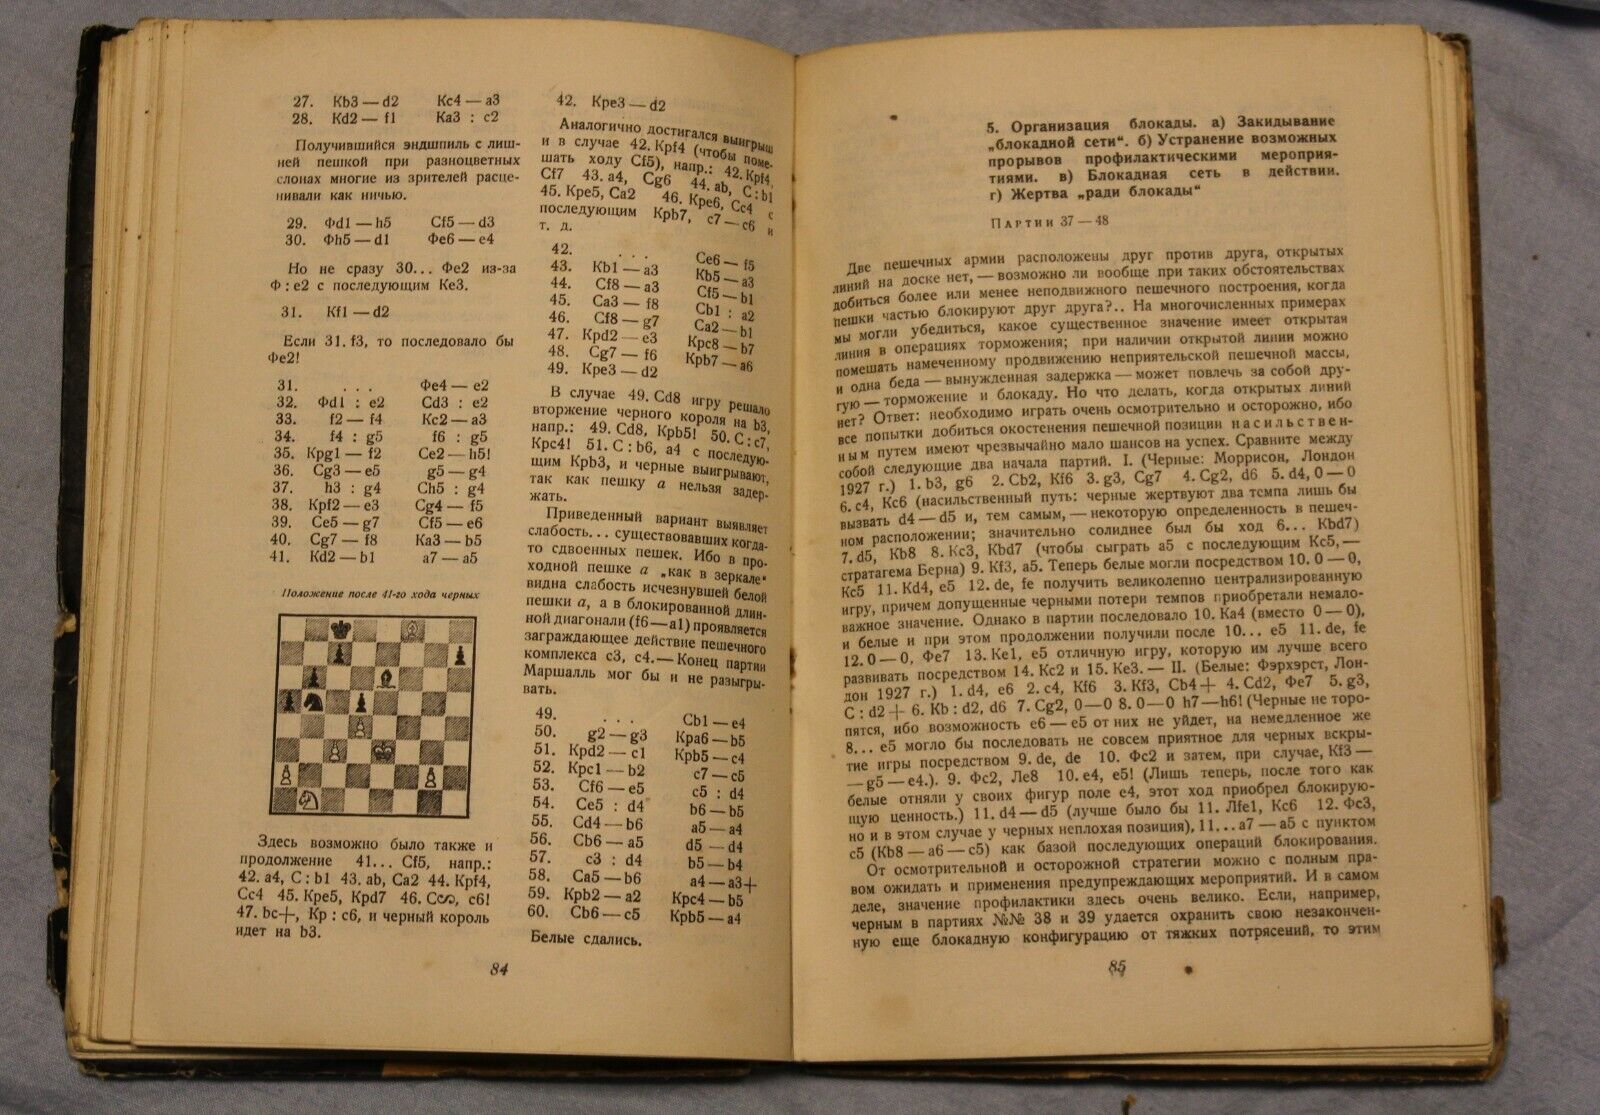 10905.Antique Soviet Chess Book. A. Nimzovich. My system in practice. 1930